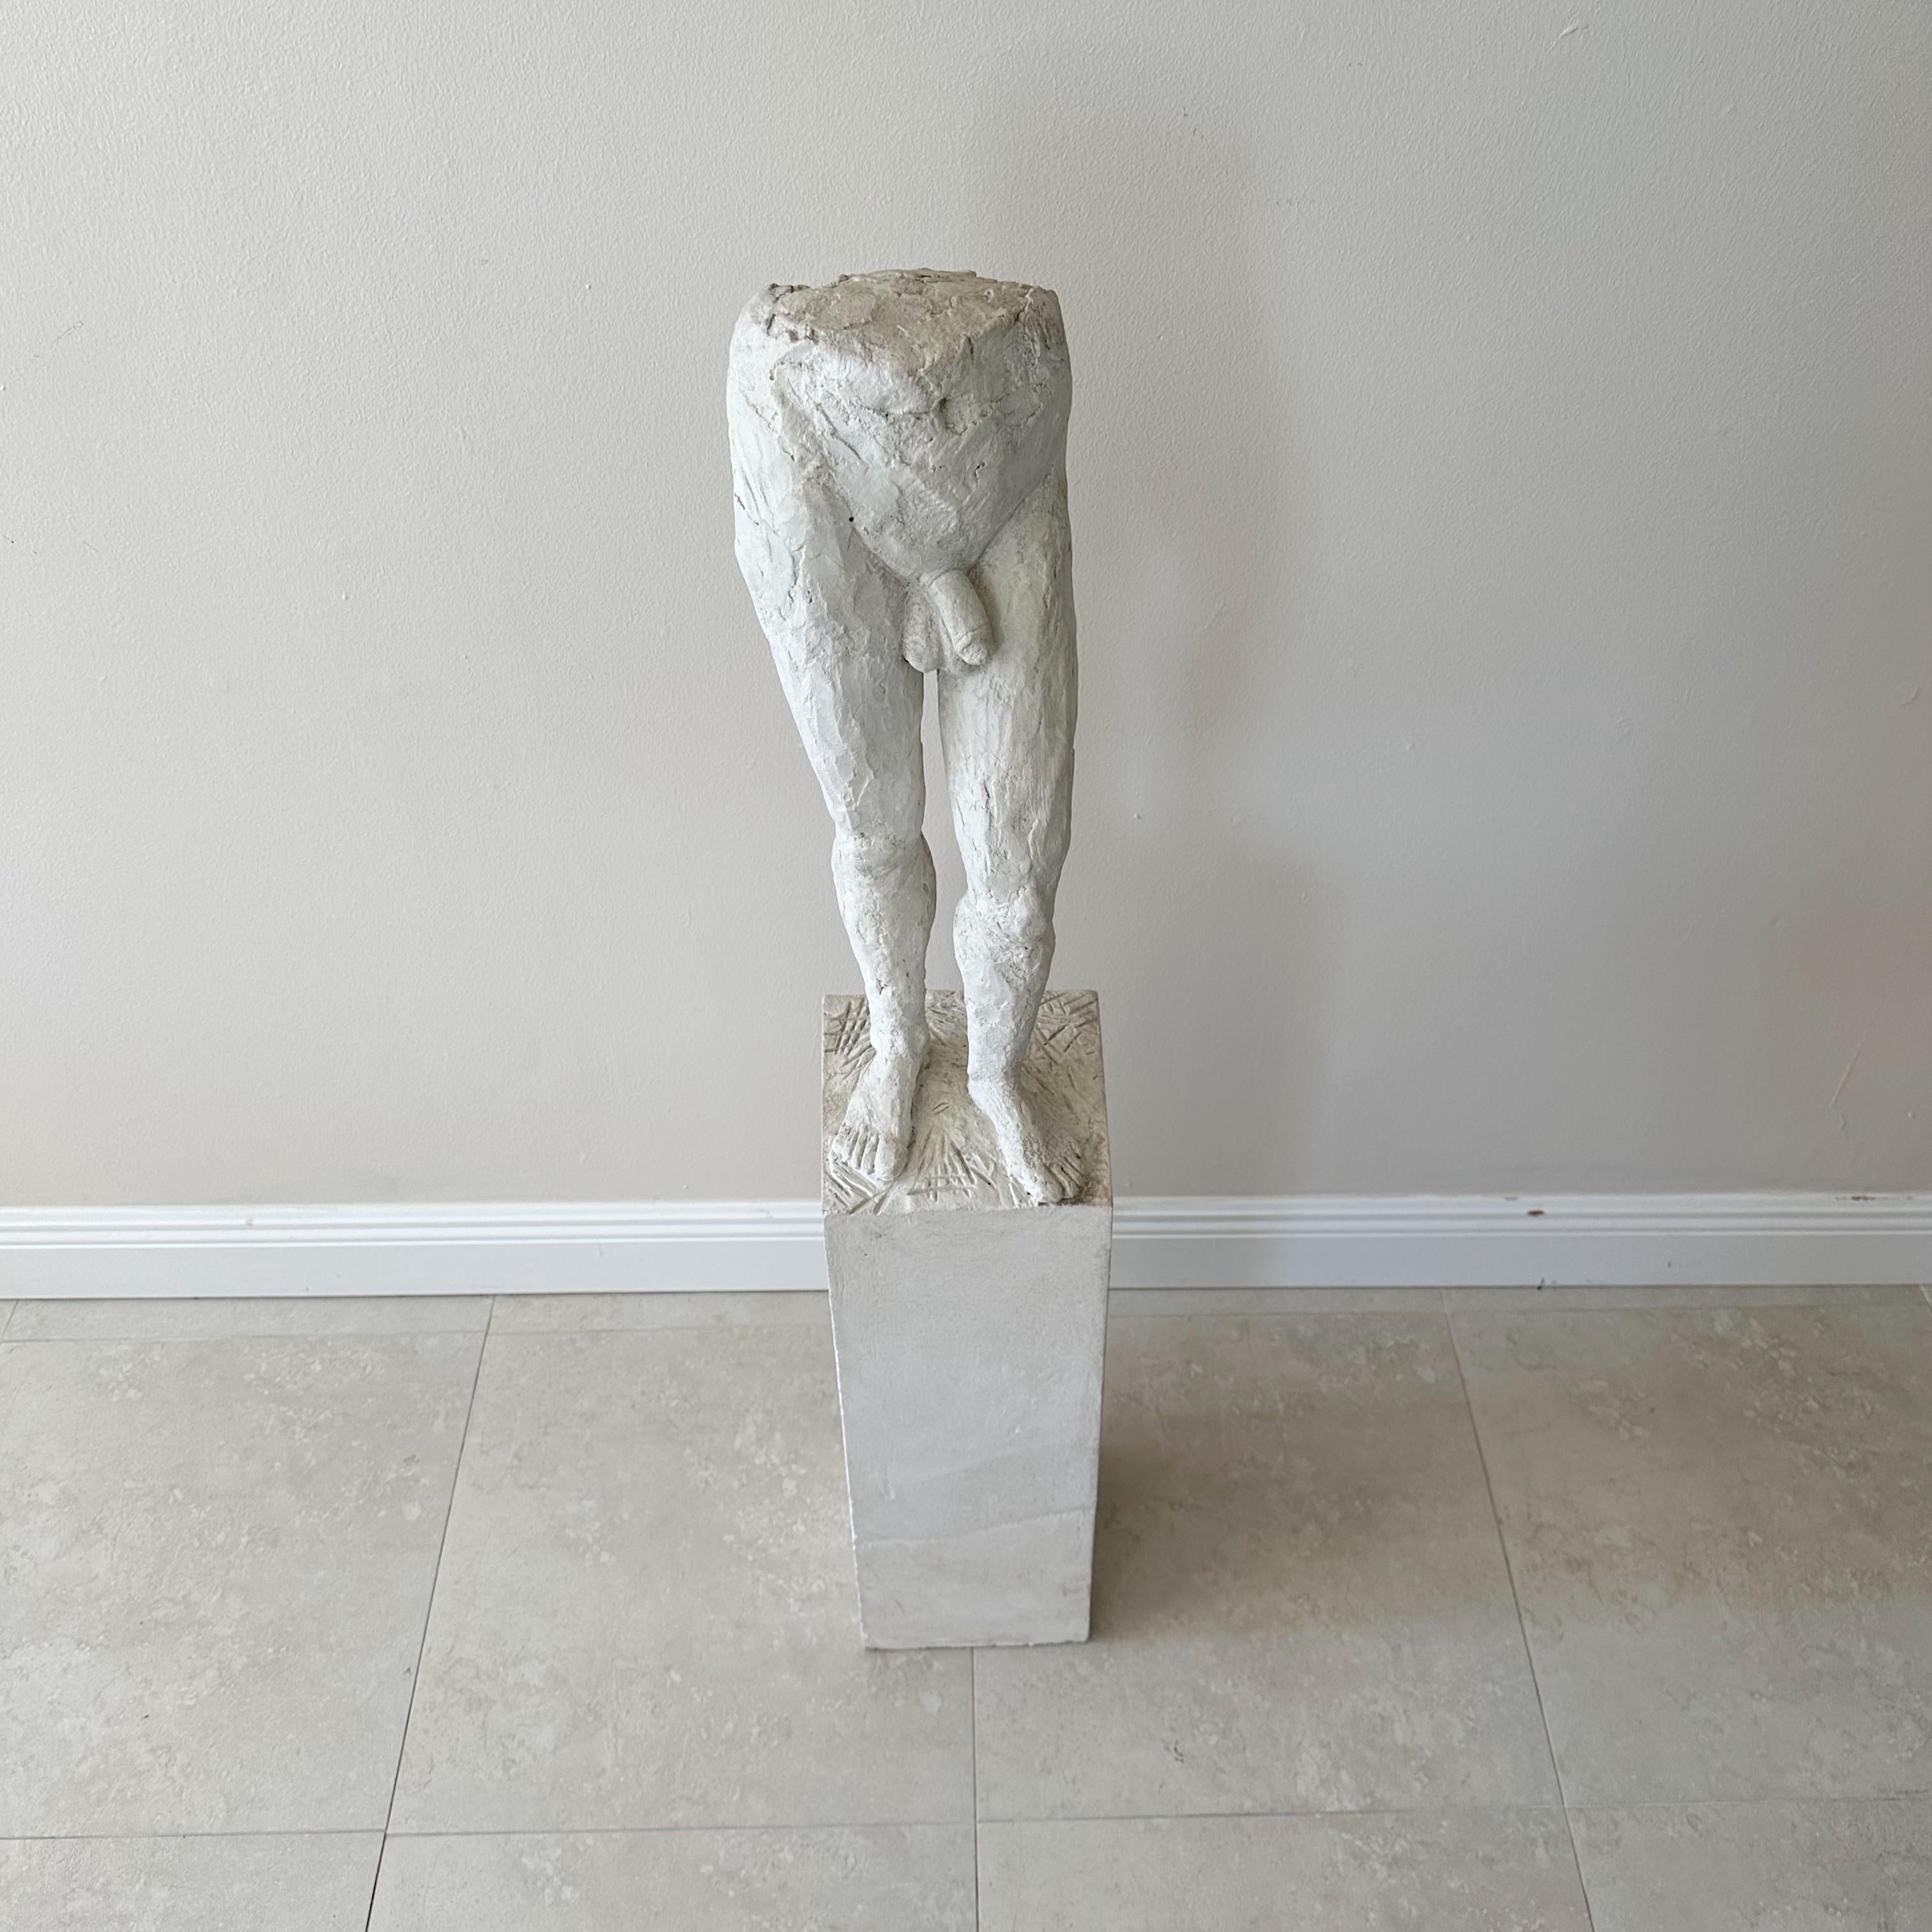 For sale is a unique and eye-catching figurative ower torso made of plastered cement, which is attached to a cement rectangular column that is also plastered. The piece is created by the talented artist Orlando Chiang in his studio. This artwork is